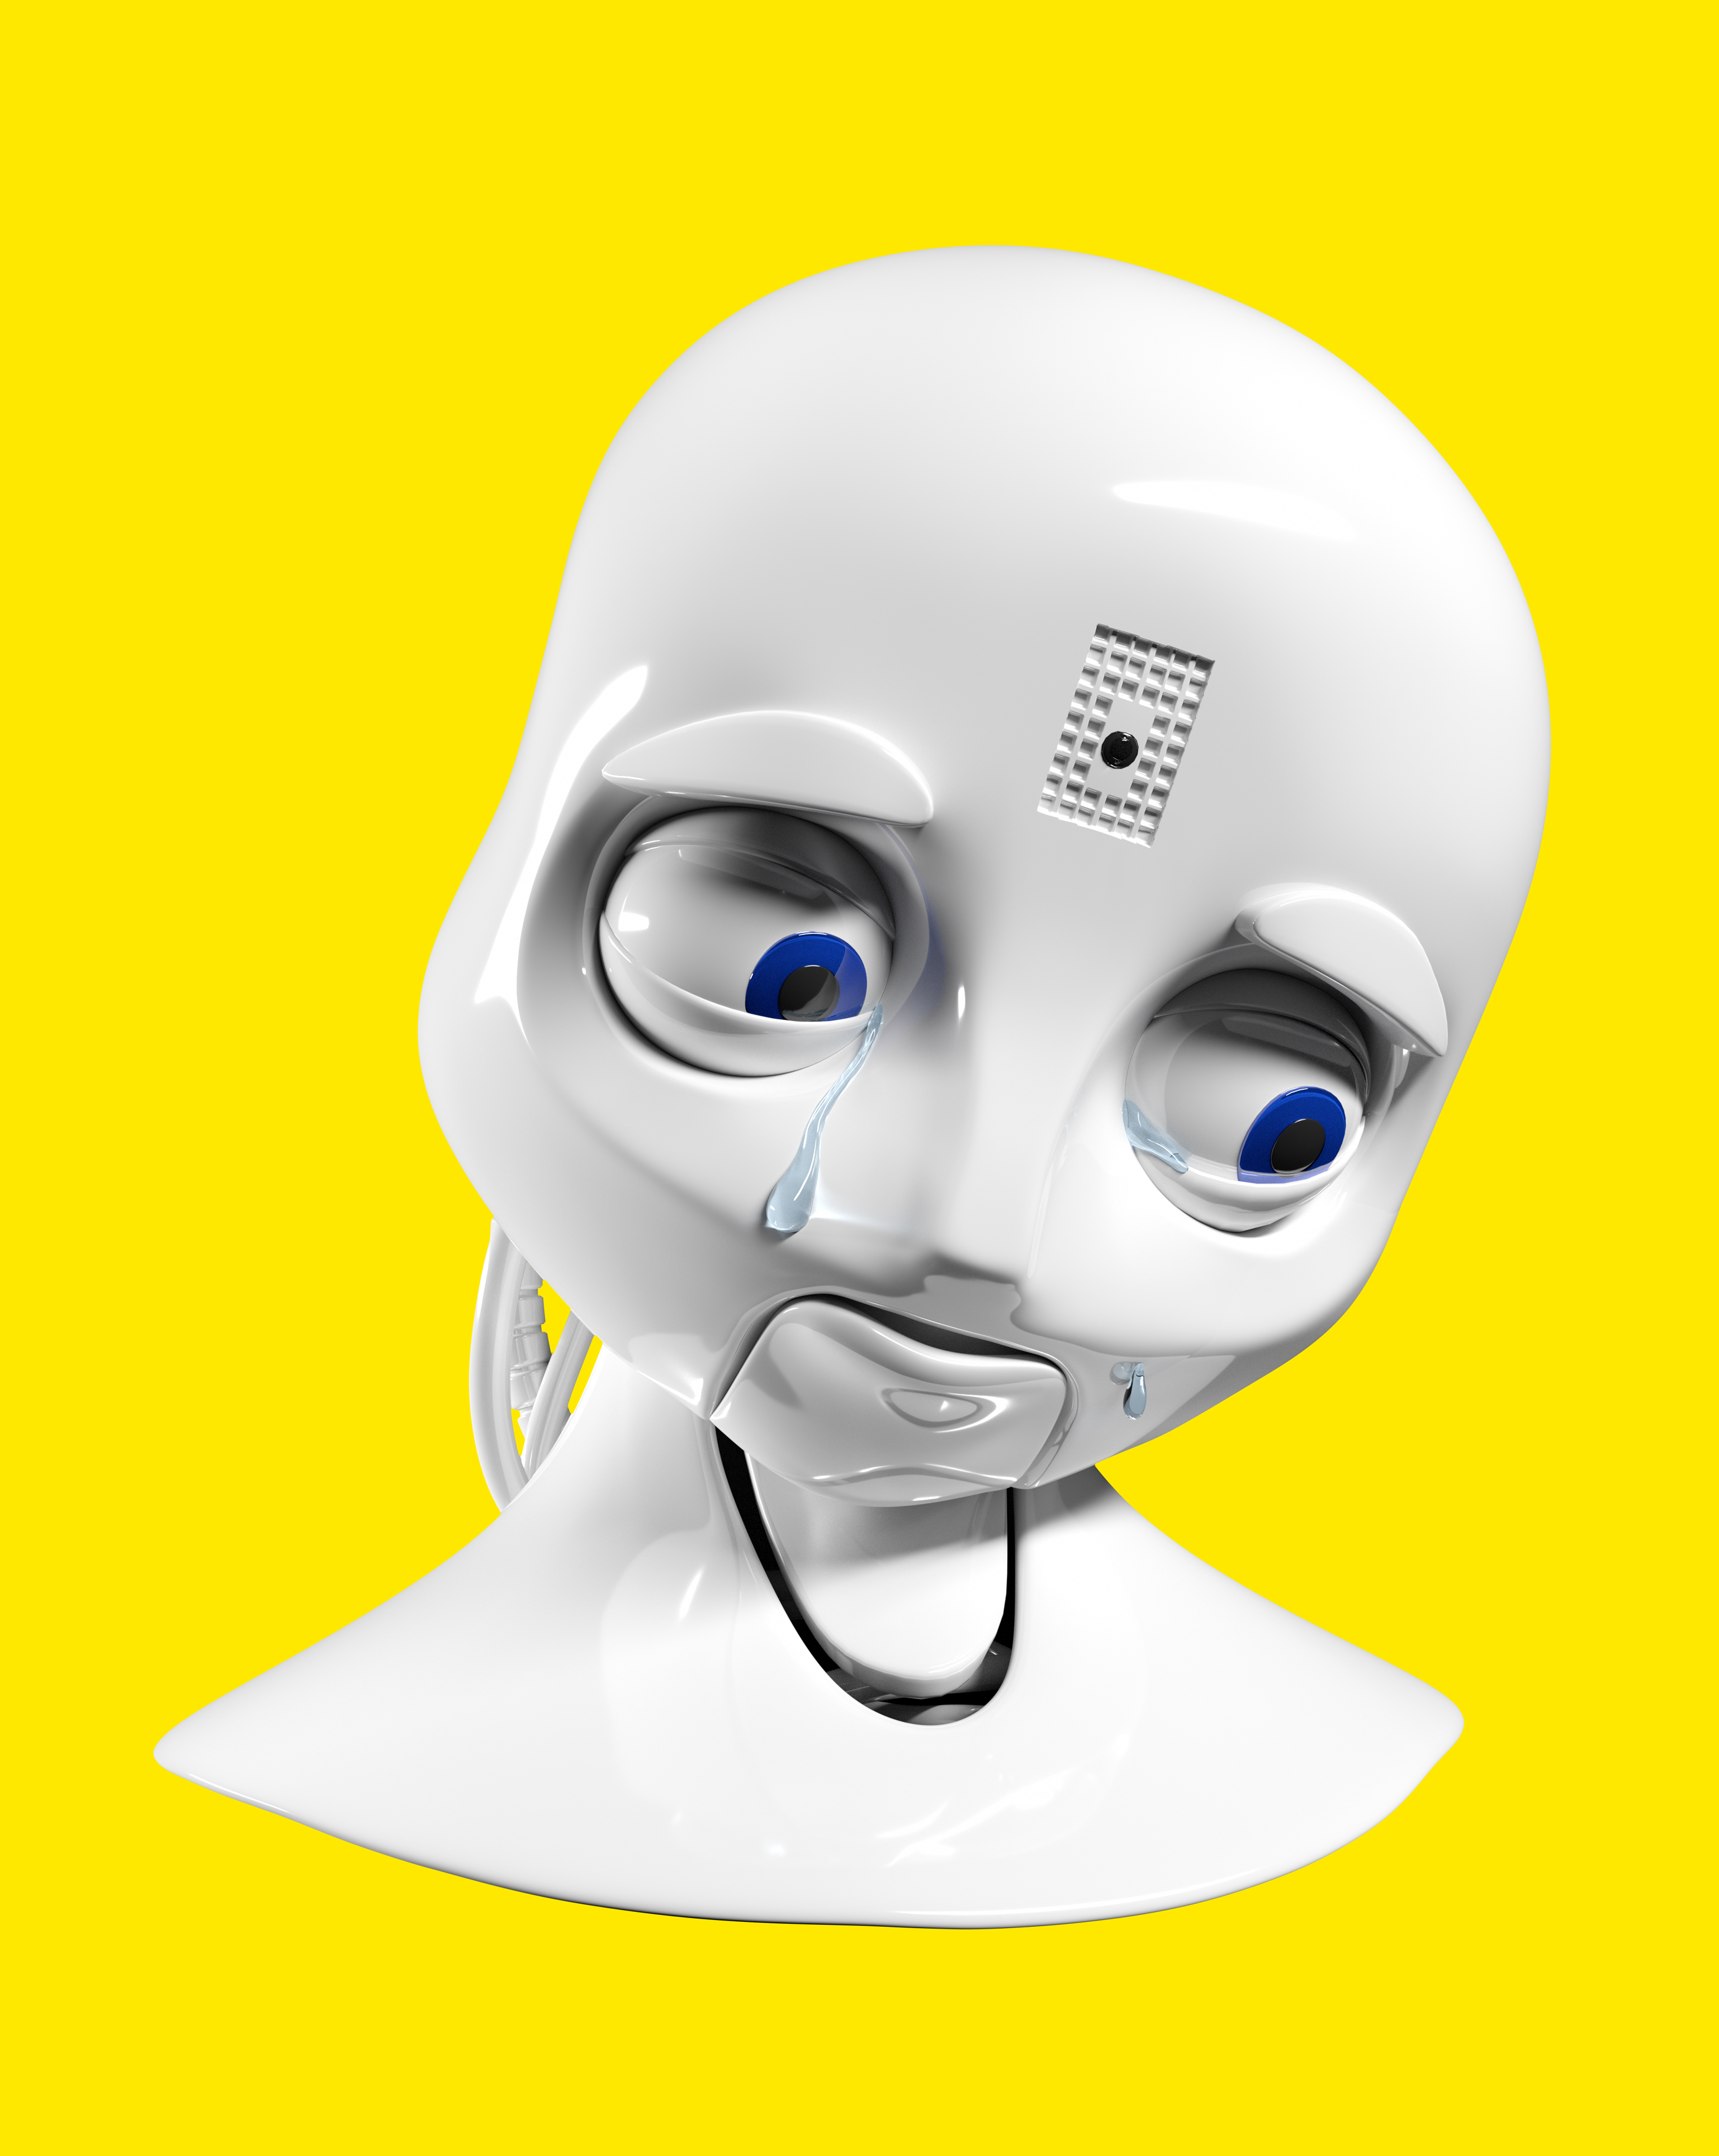 How We Feel About Robots That Feel | MIT Technology Review